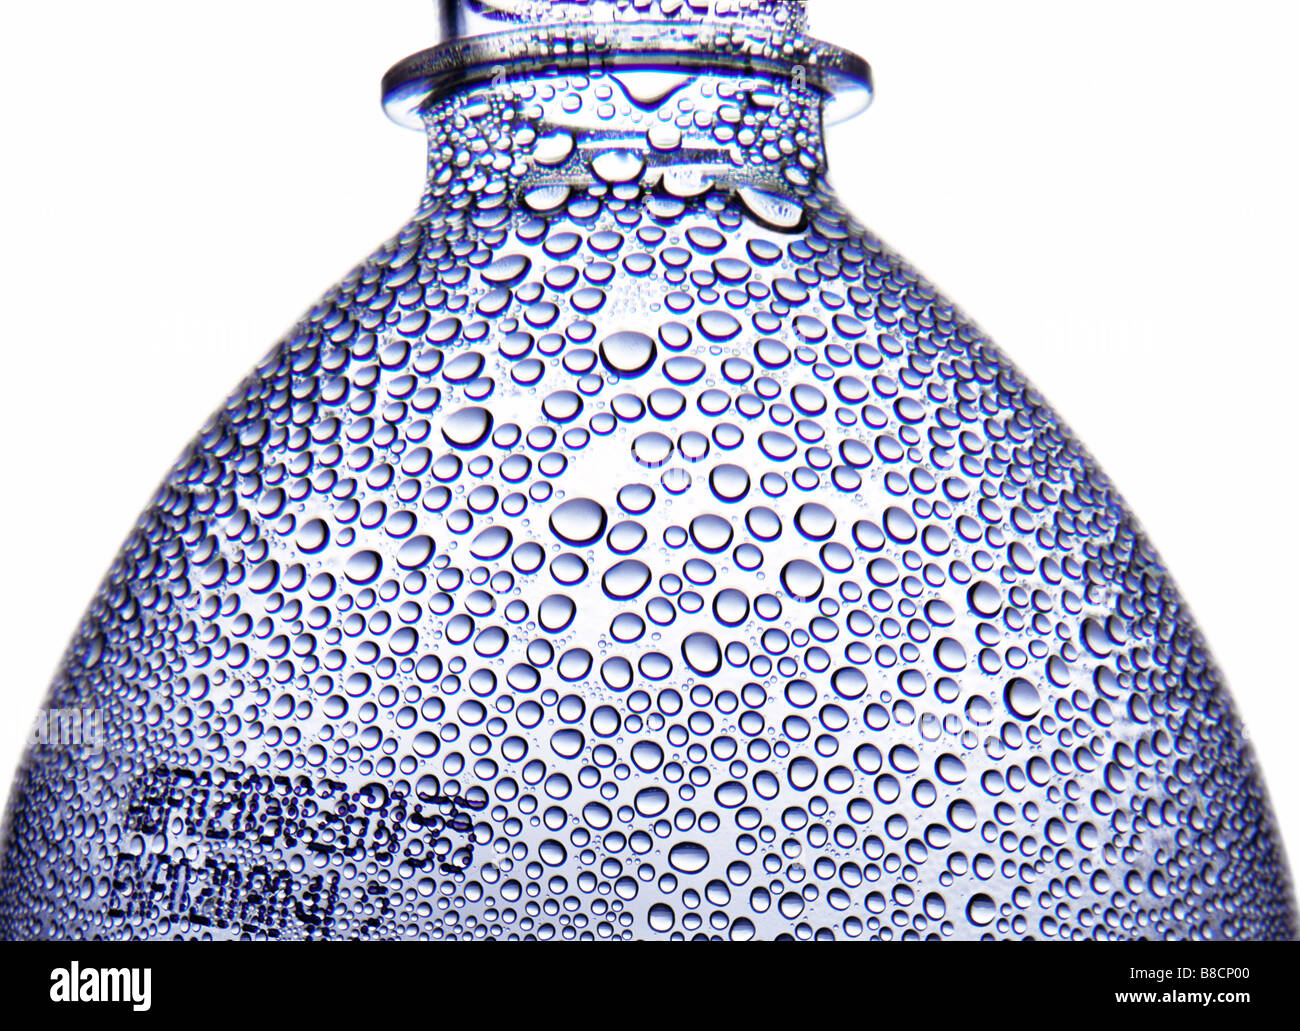 FL6422, Ian Campbell; Close Up, Top  Water Bottle Stock Photo